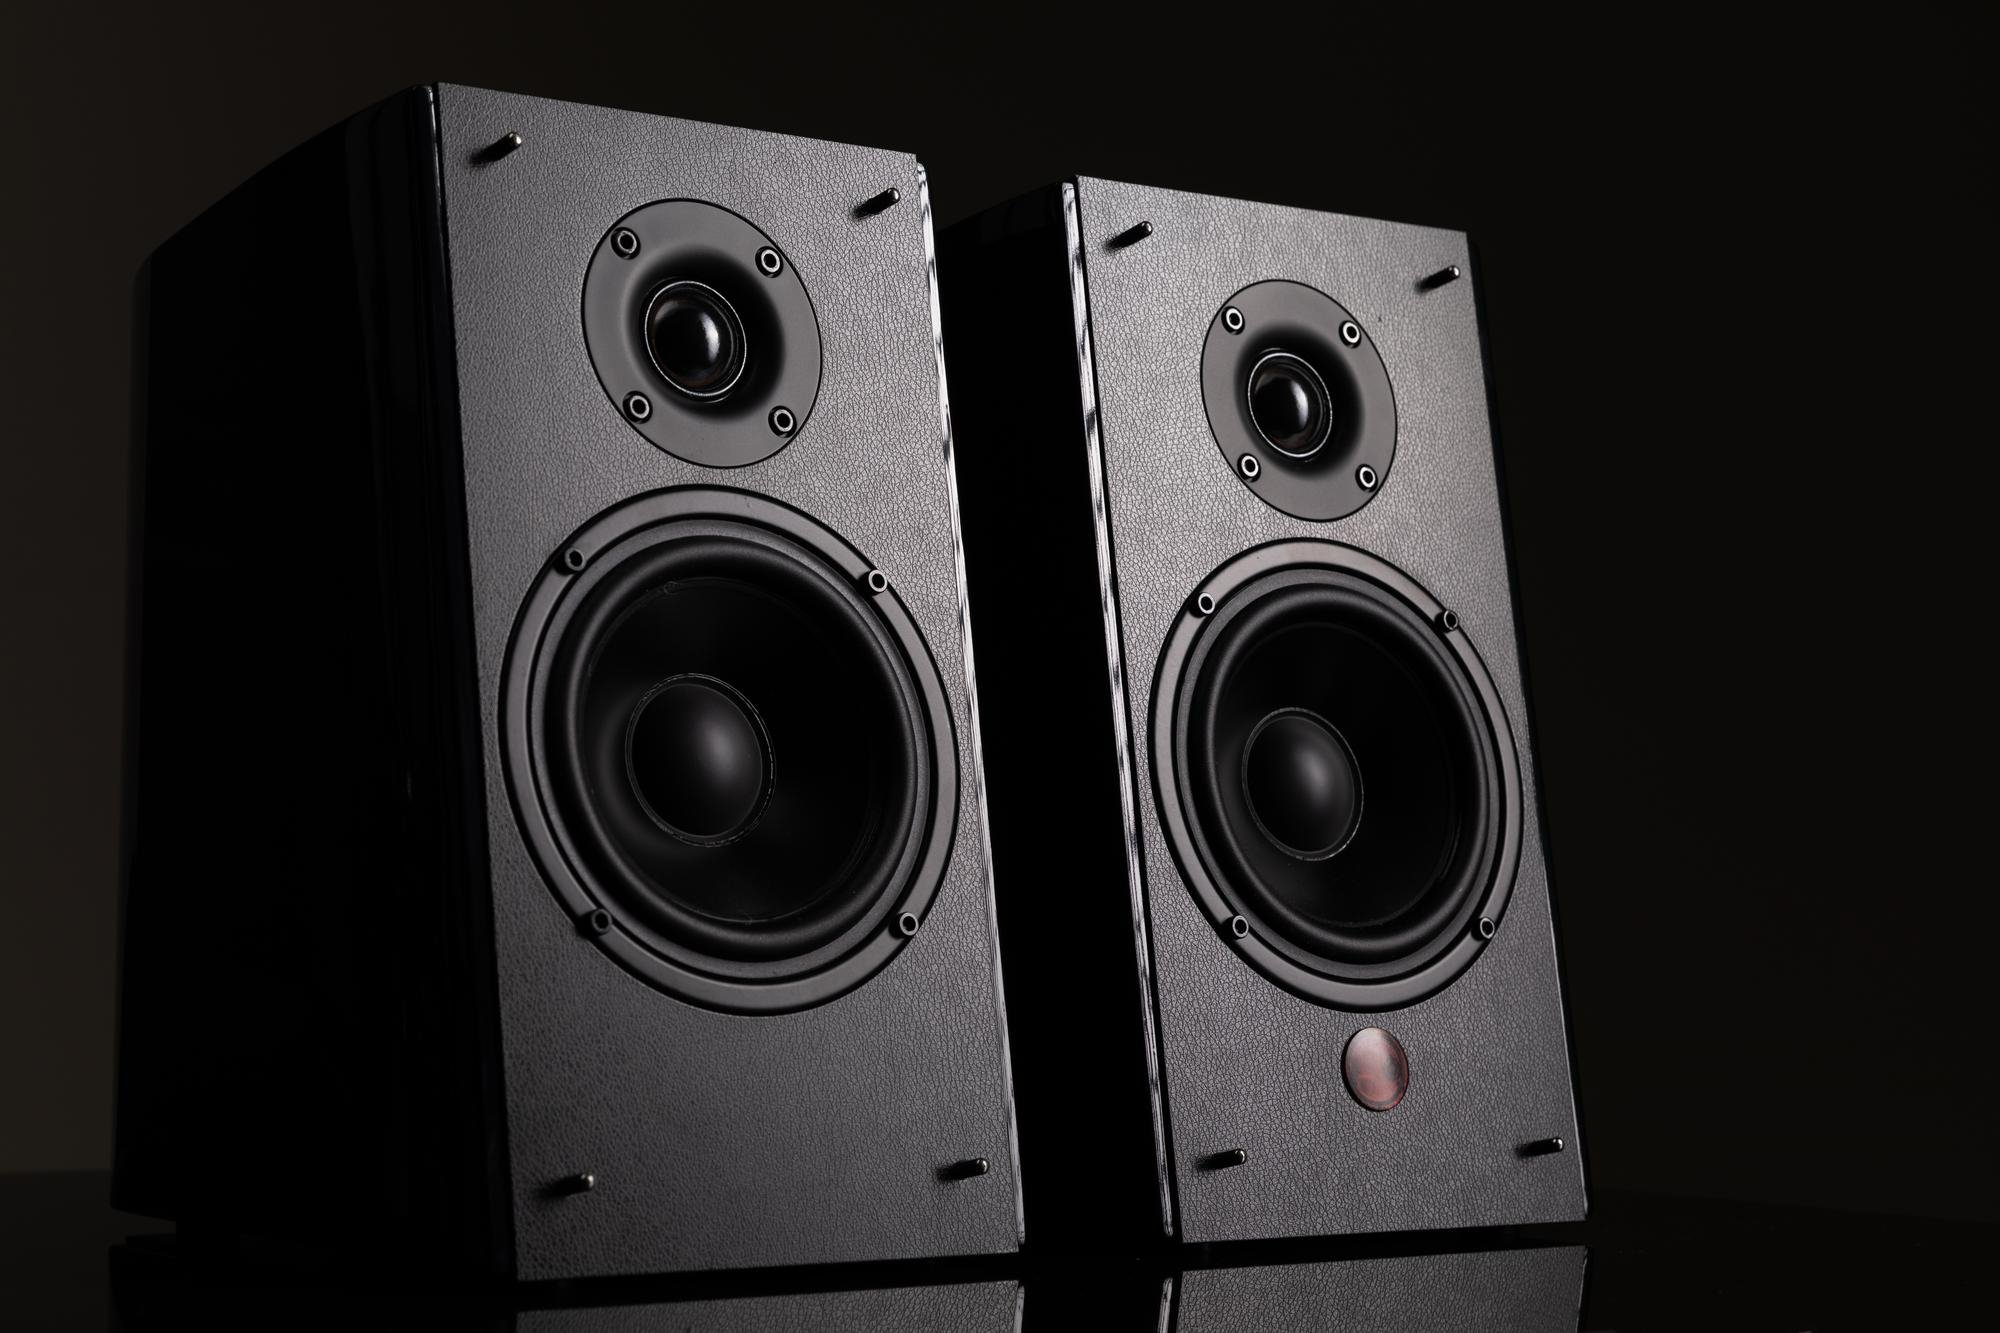 image-photograph-pair-hifi-level-music-speakers-with-two-speakers-black-background